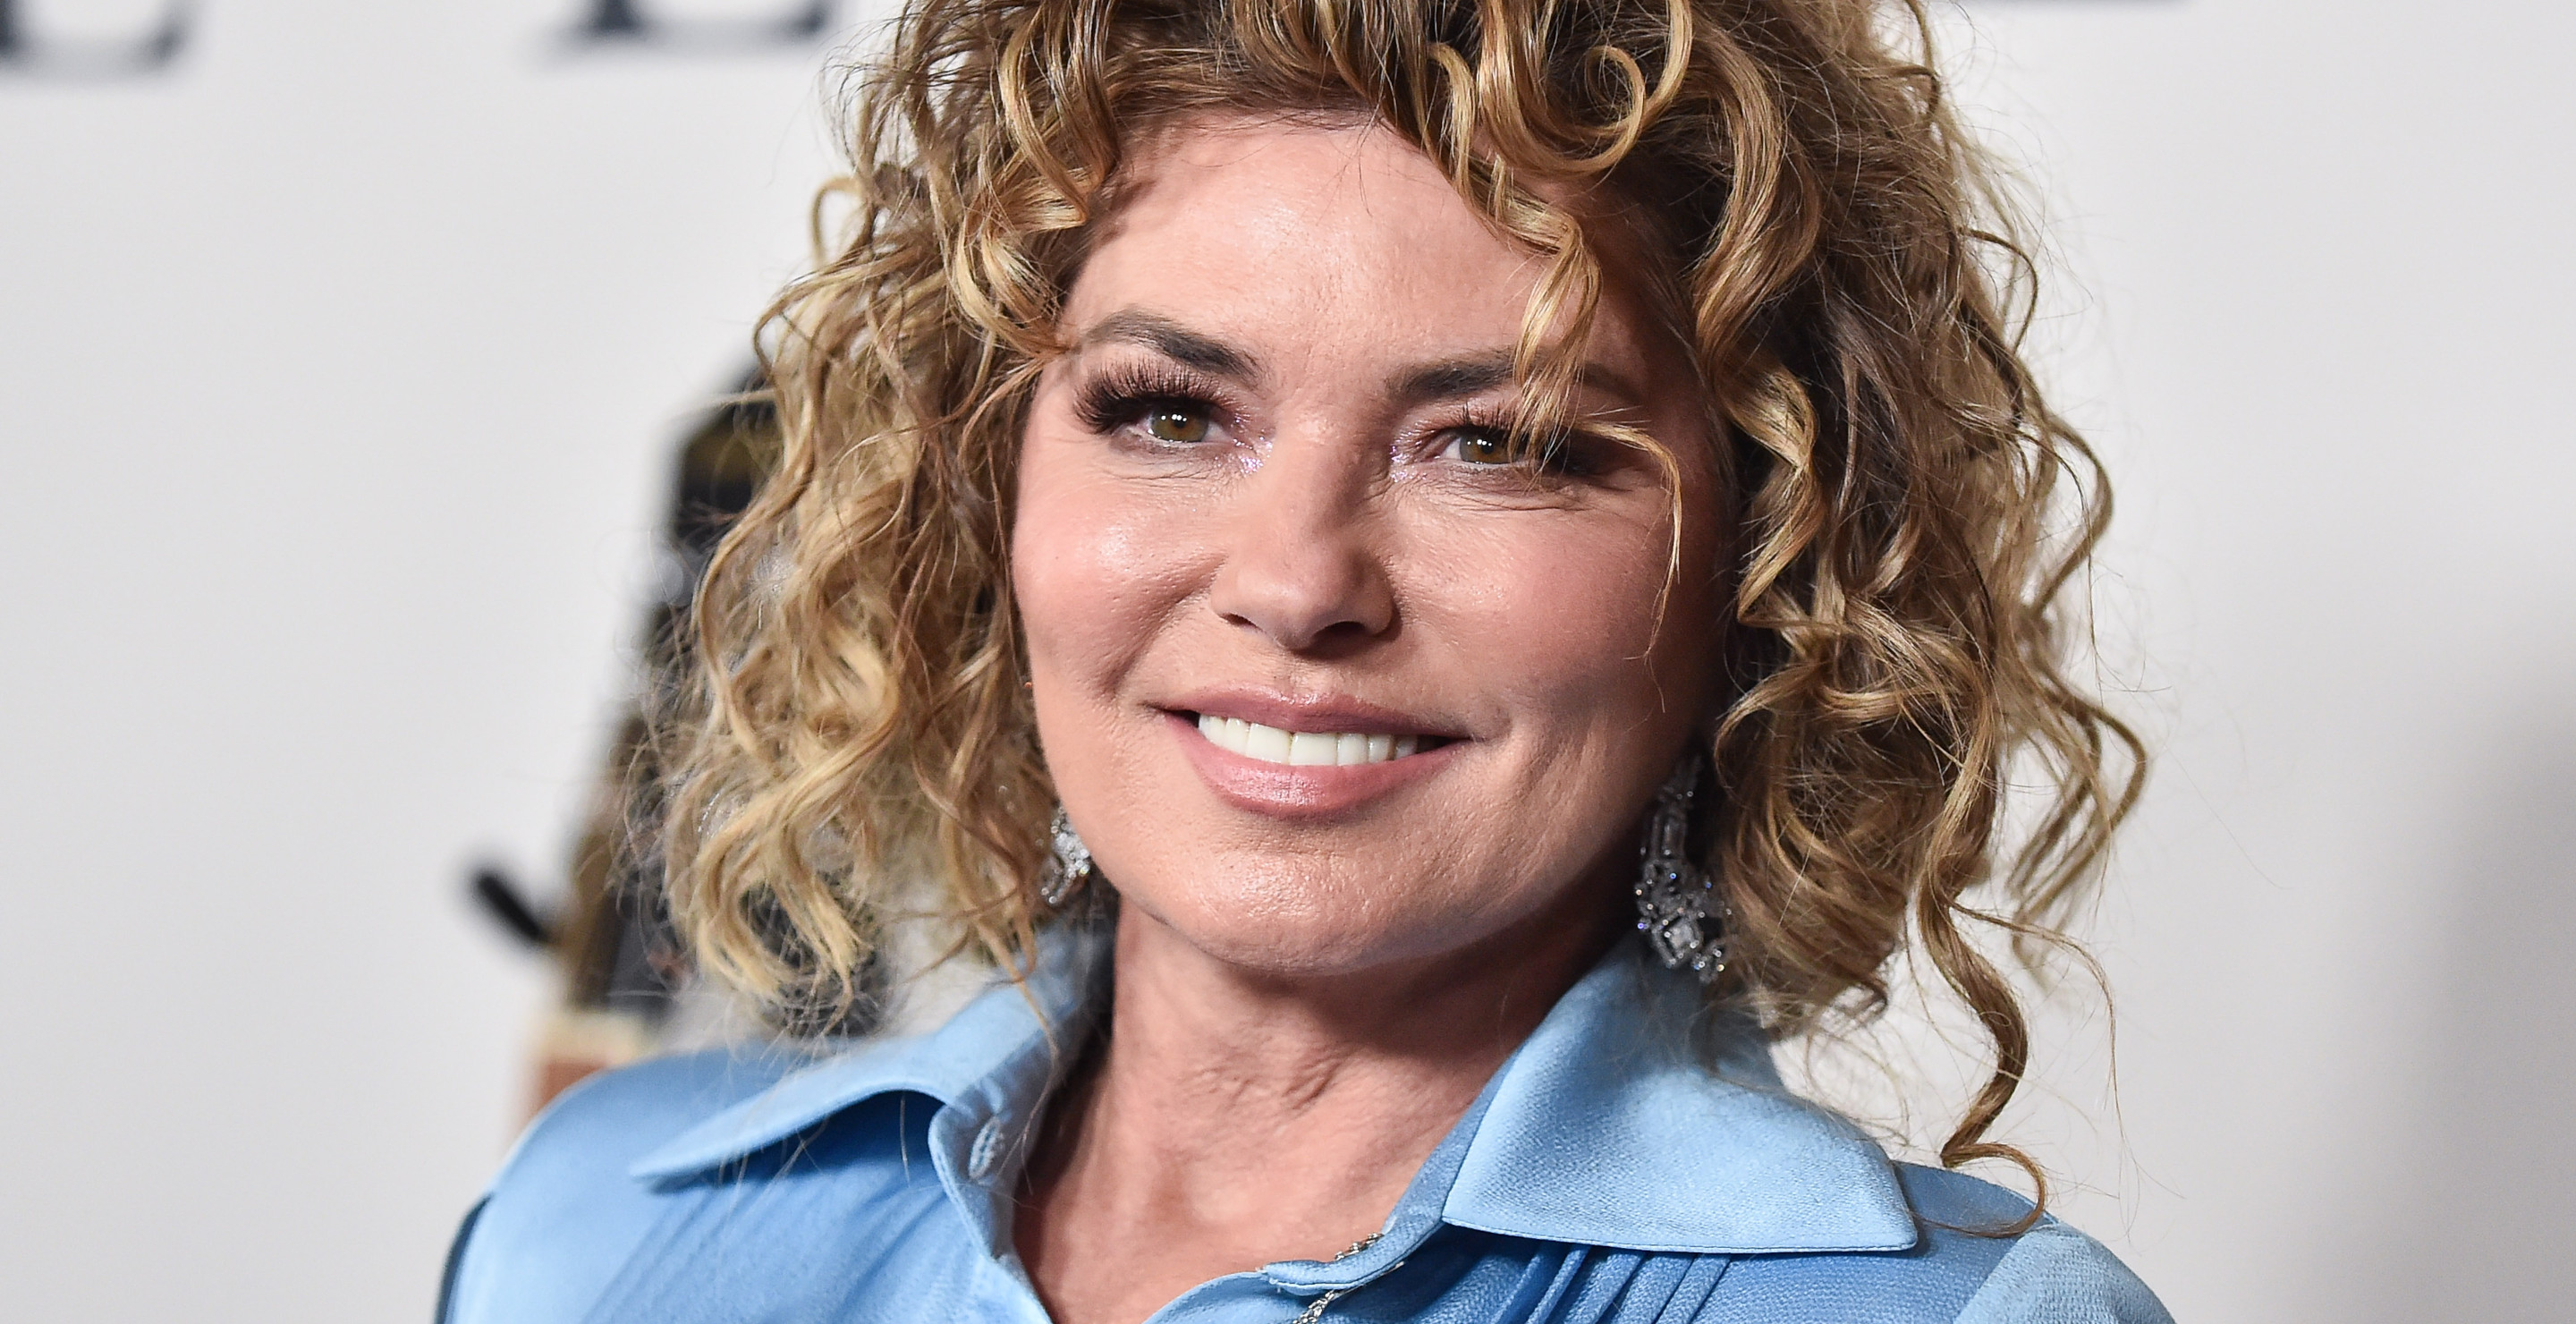 Shania Twain Opens Up About Years Of Abuse And Childhood Poverty